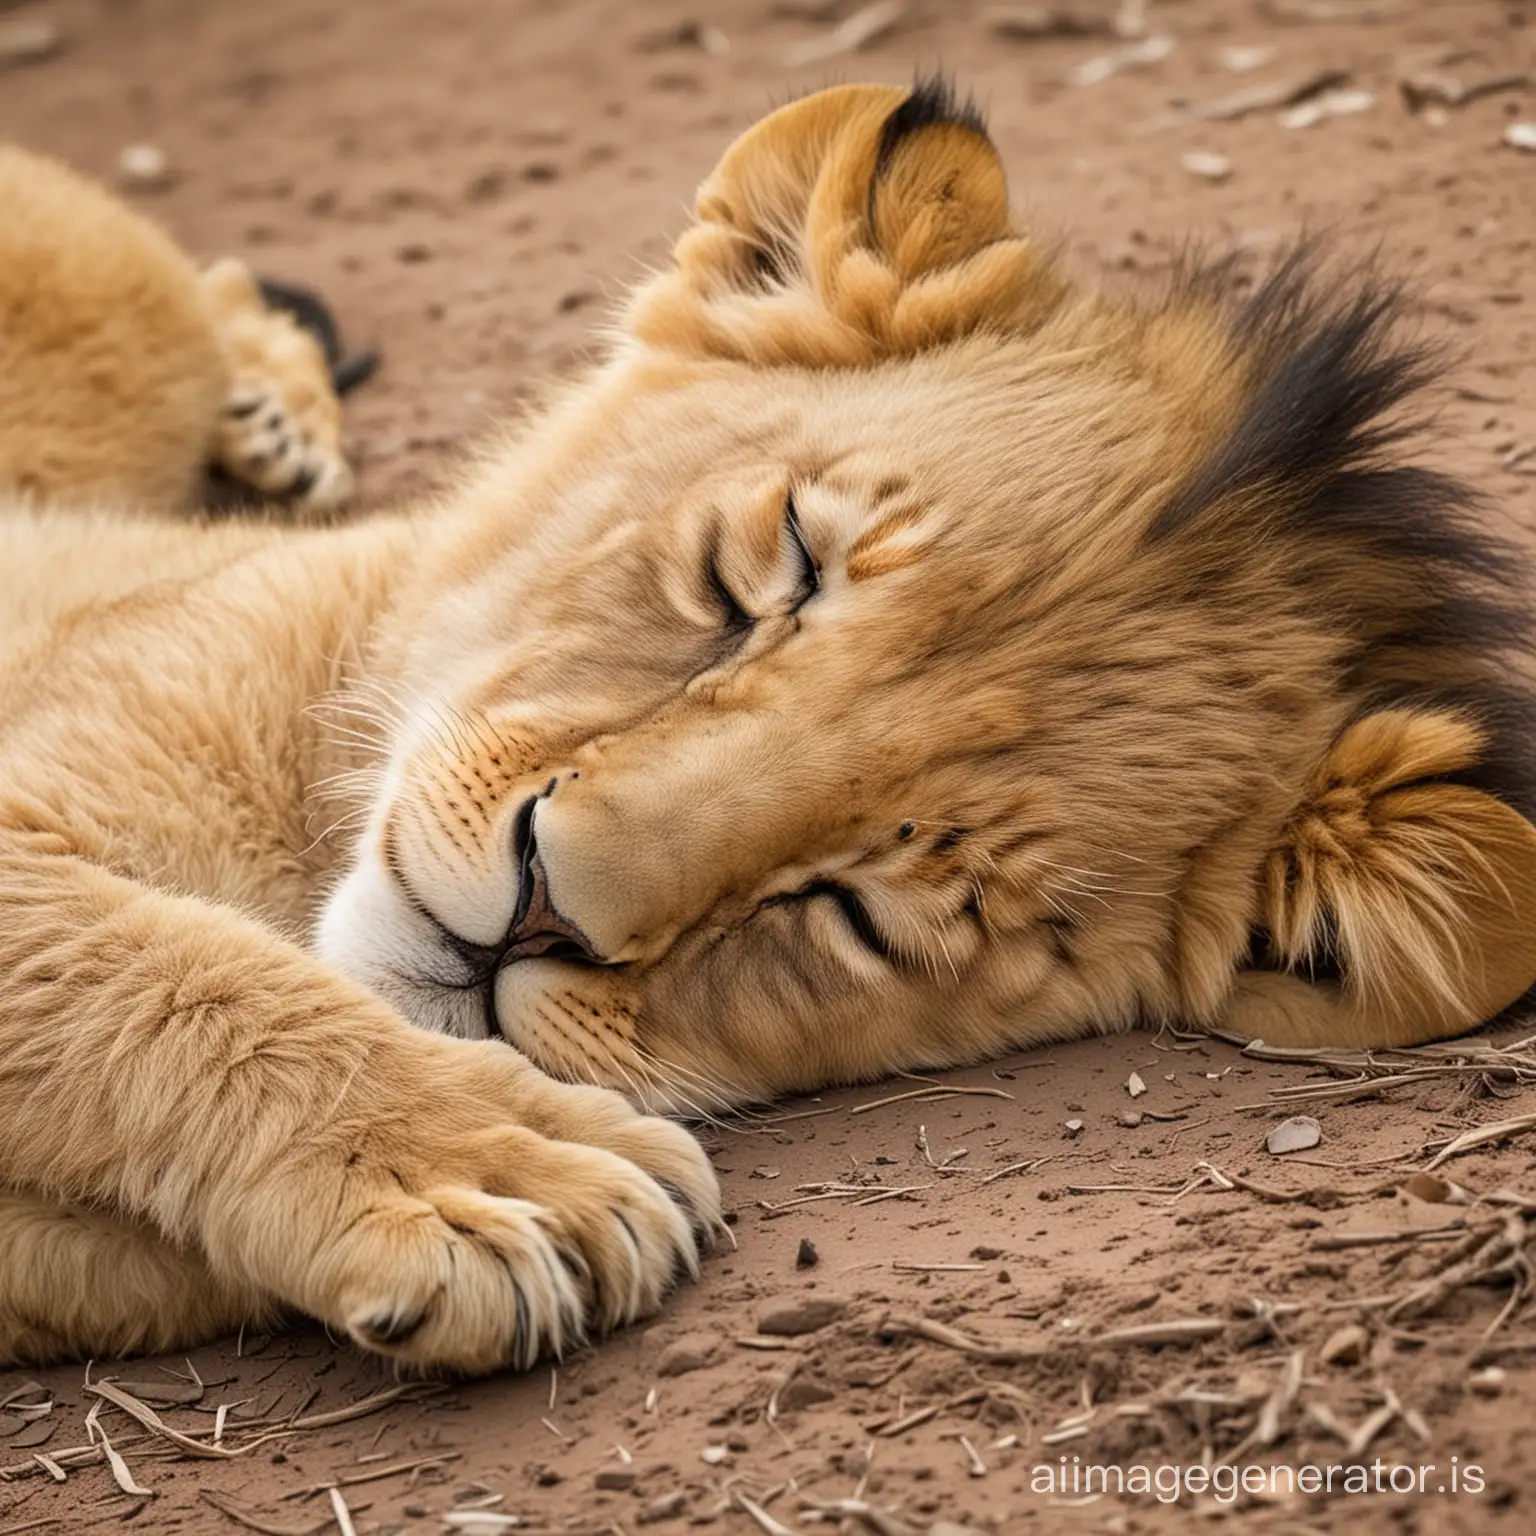 Very beautiful and cute lion baby are sleeping